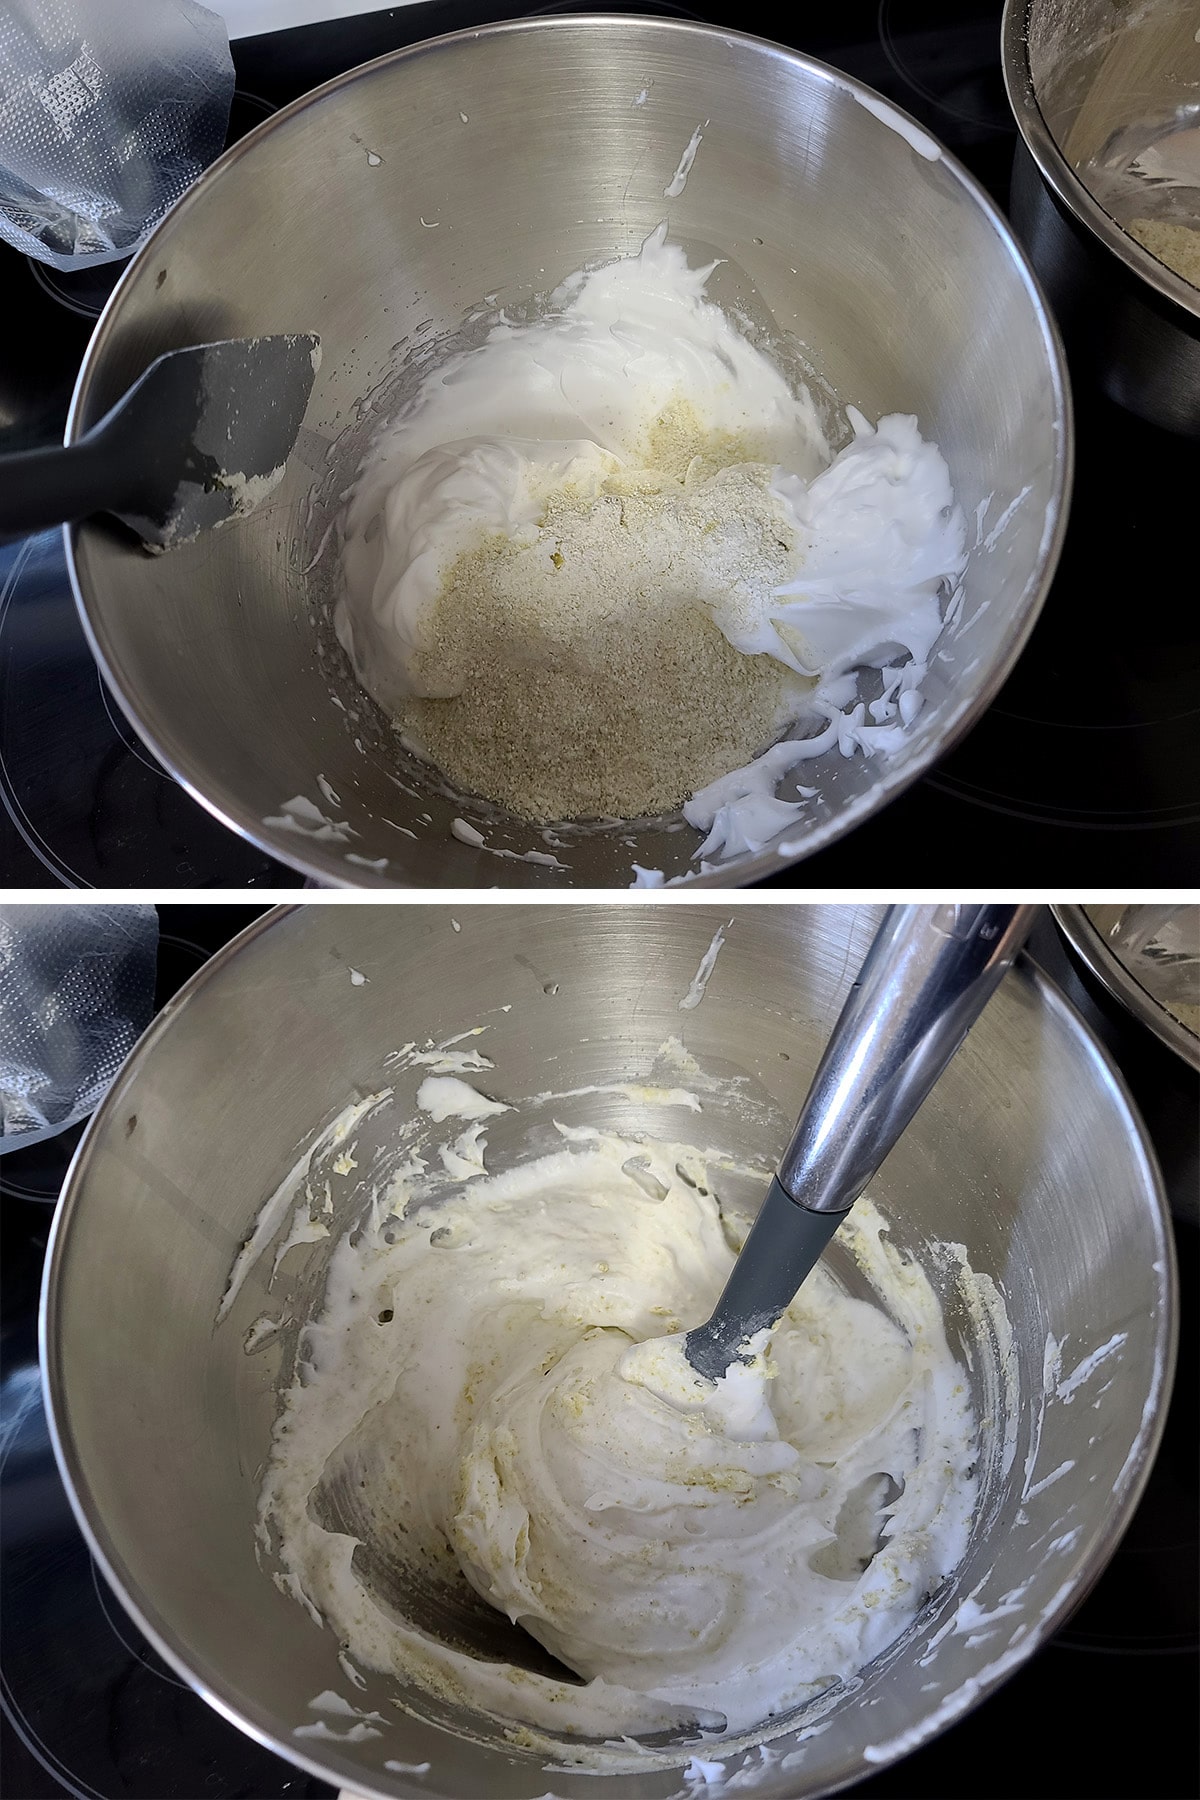 A small amount of the nut mixture being added to the eggs and stirred around.